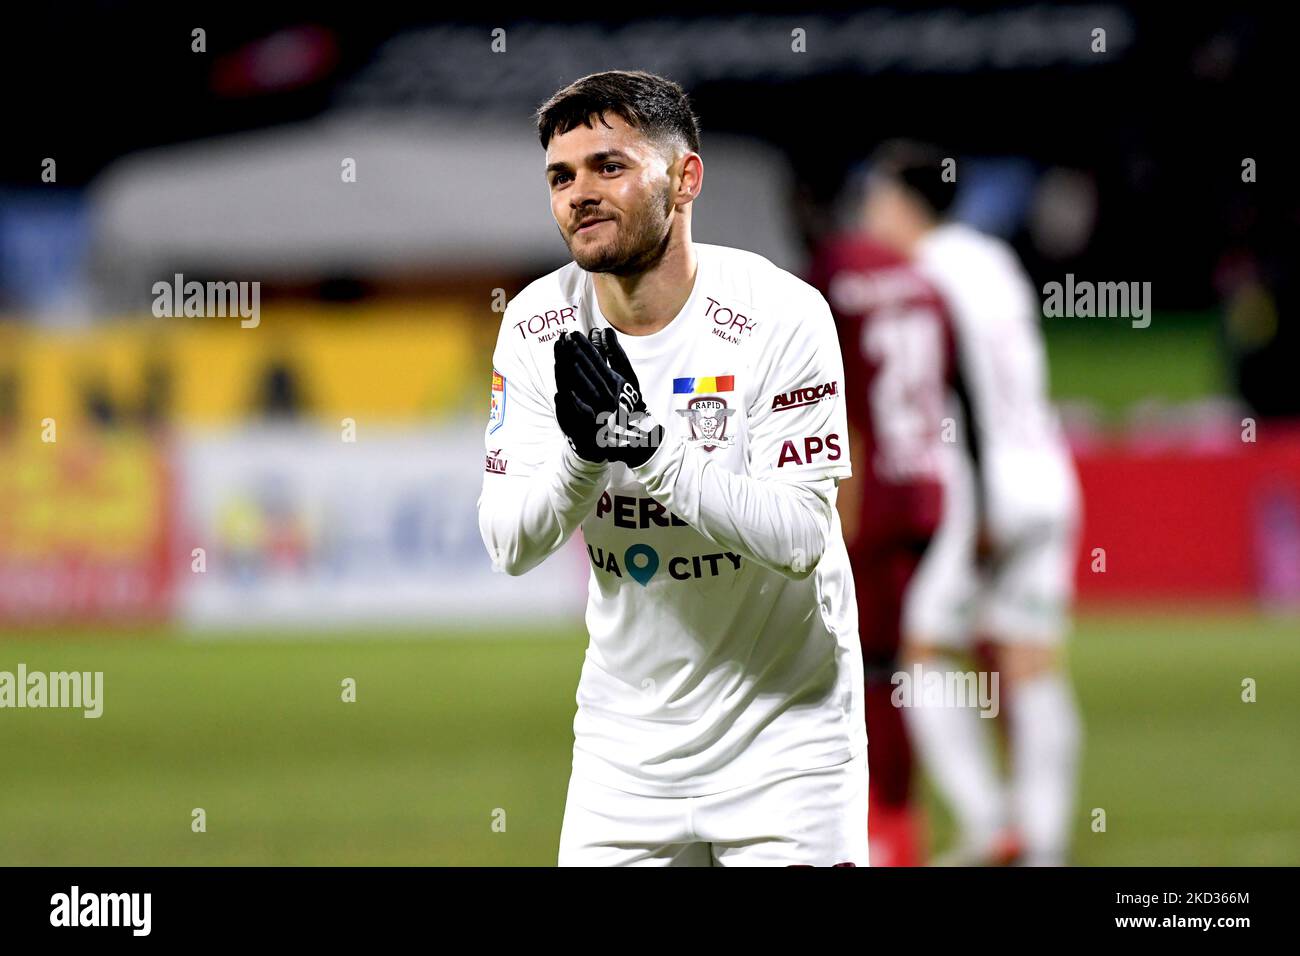 Ii liga hi-res stock photography and images - Alamy